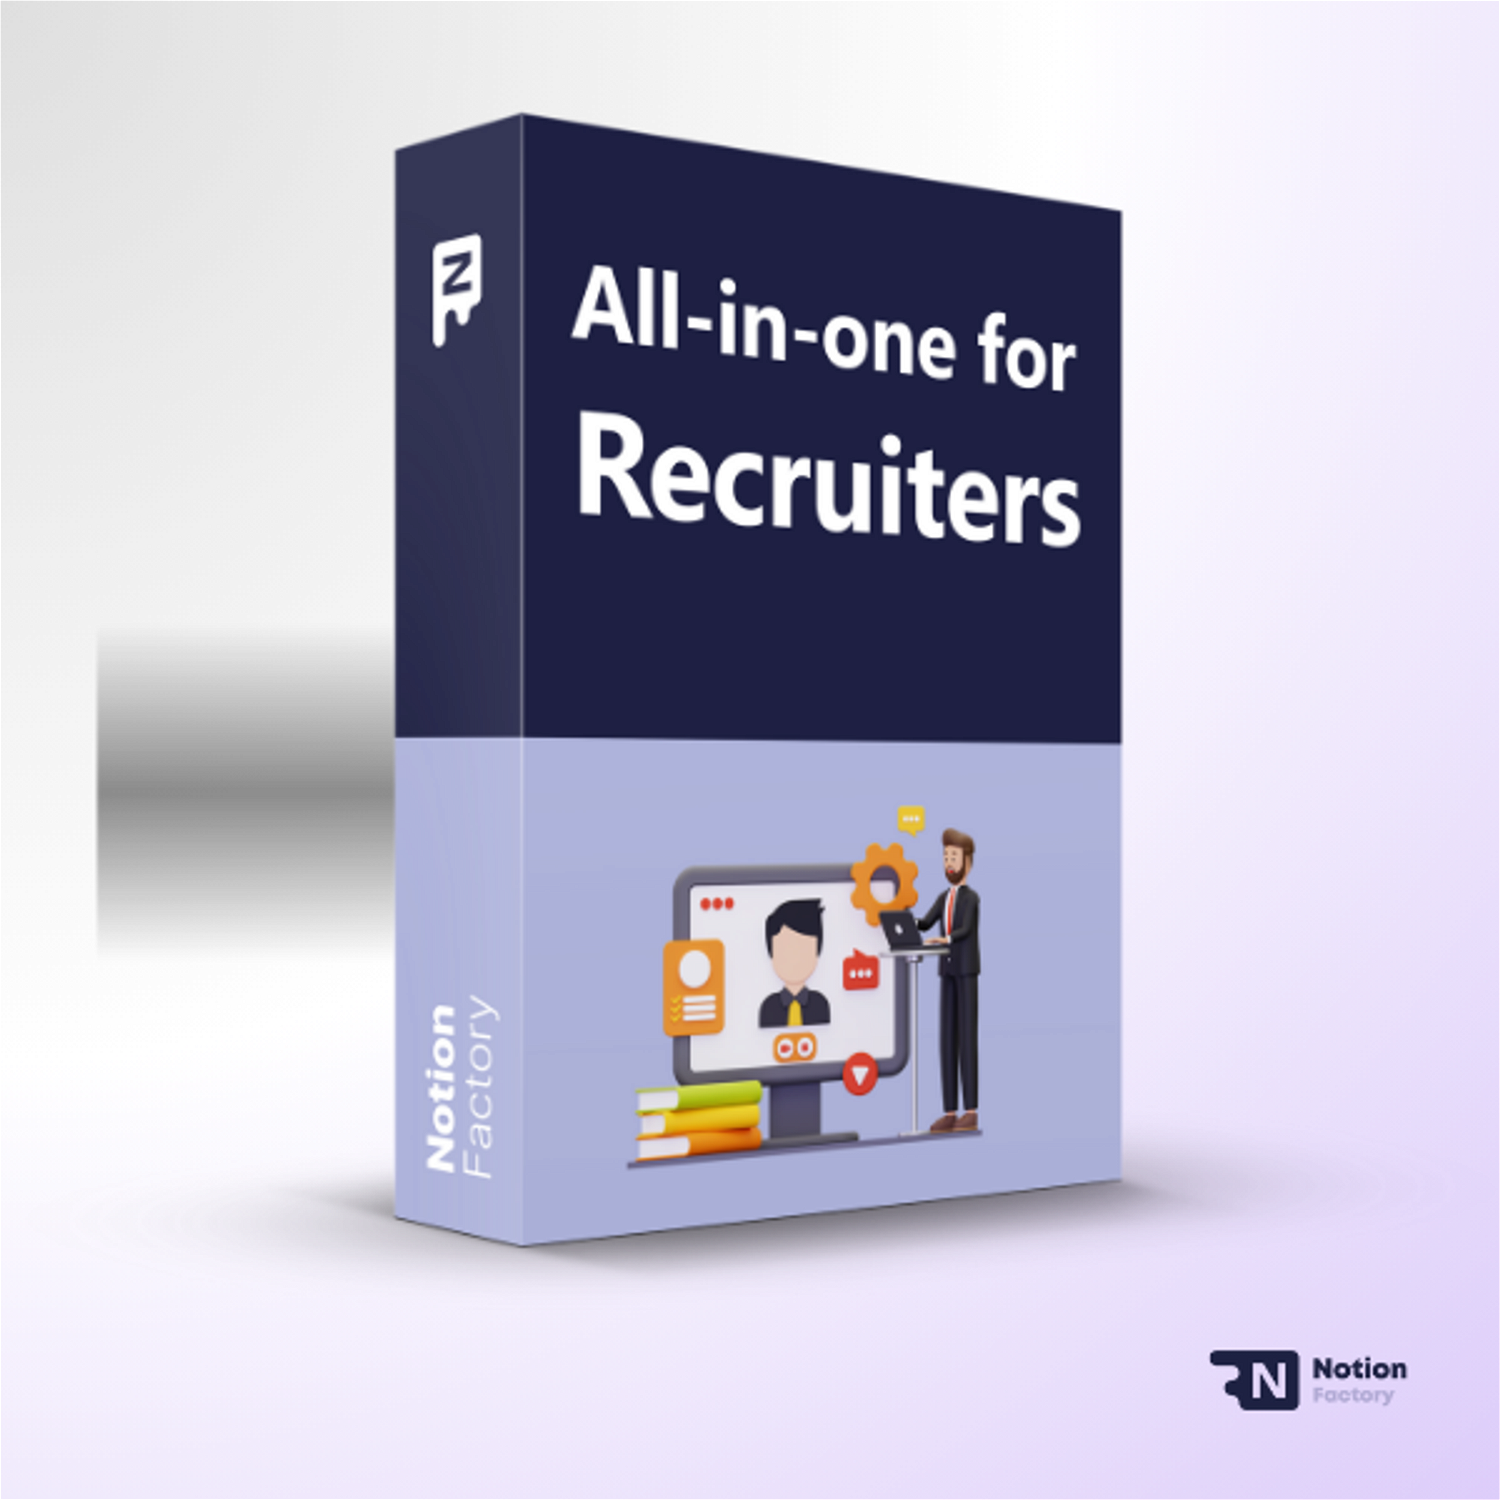 All-in-one for Recruiters